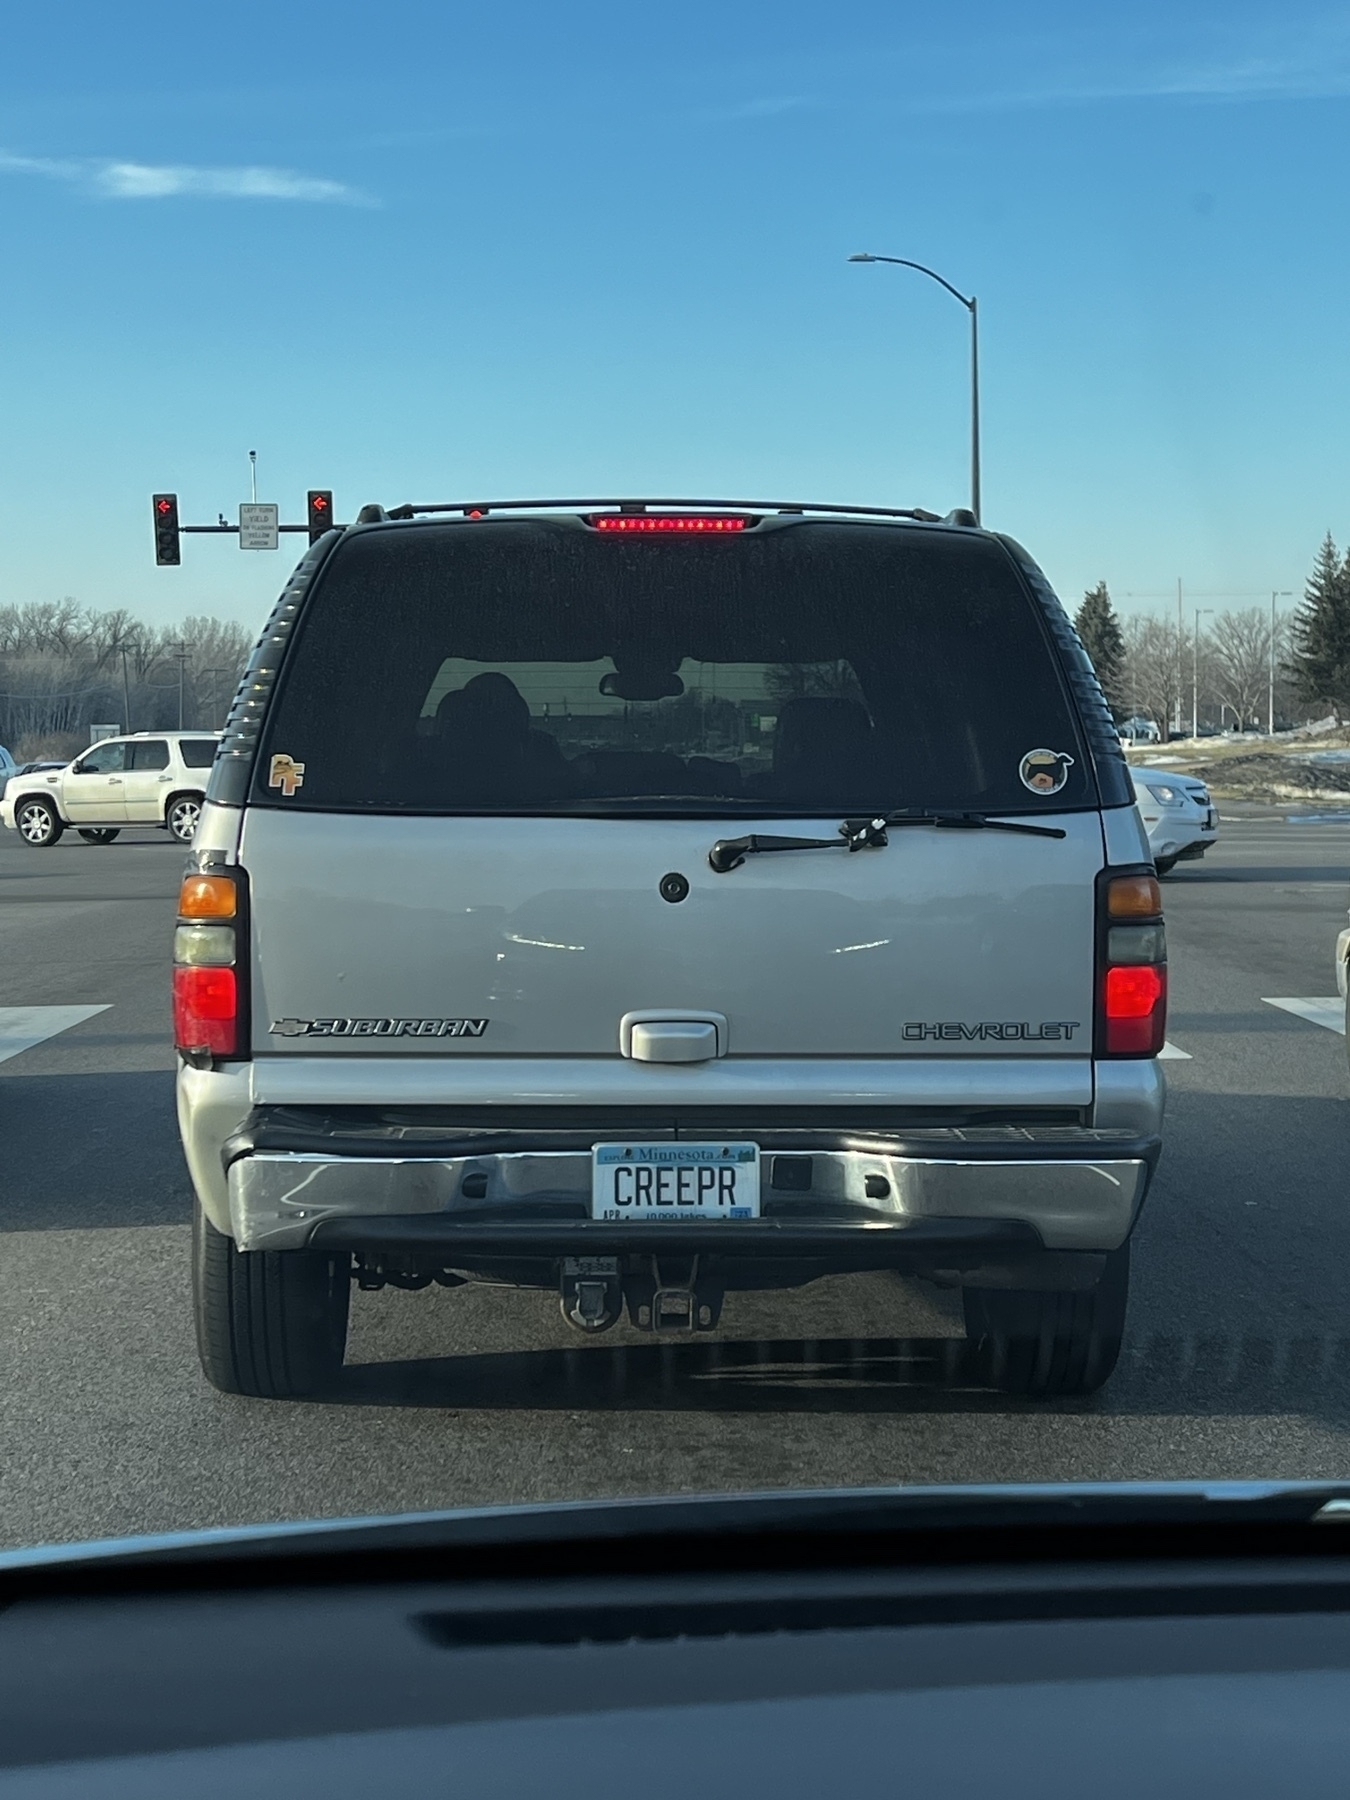 A Chevy Suburban SUV with the license plate CREEPR